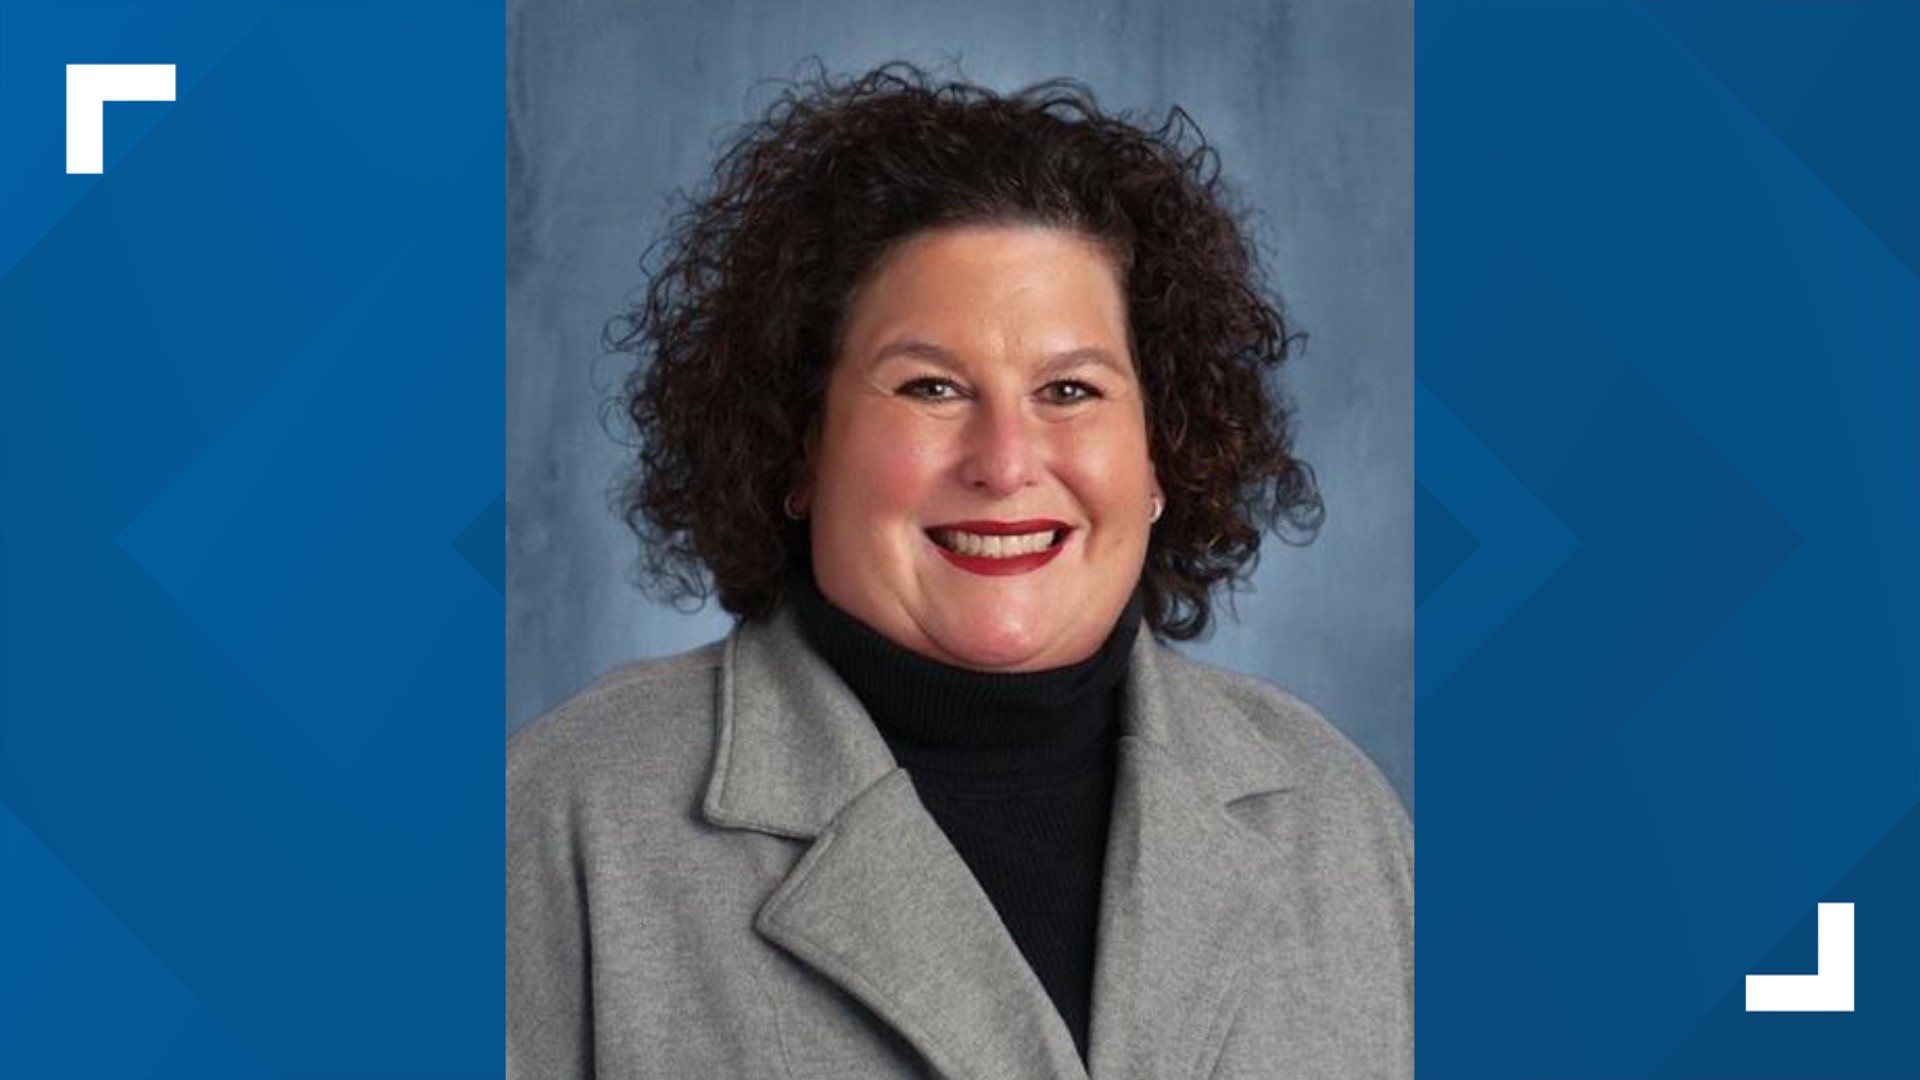 Dr. Nikki Roorda will take over the day-to-day tasks expected of a superintendent starting next semester, but administrative work is far from new to her.